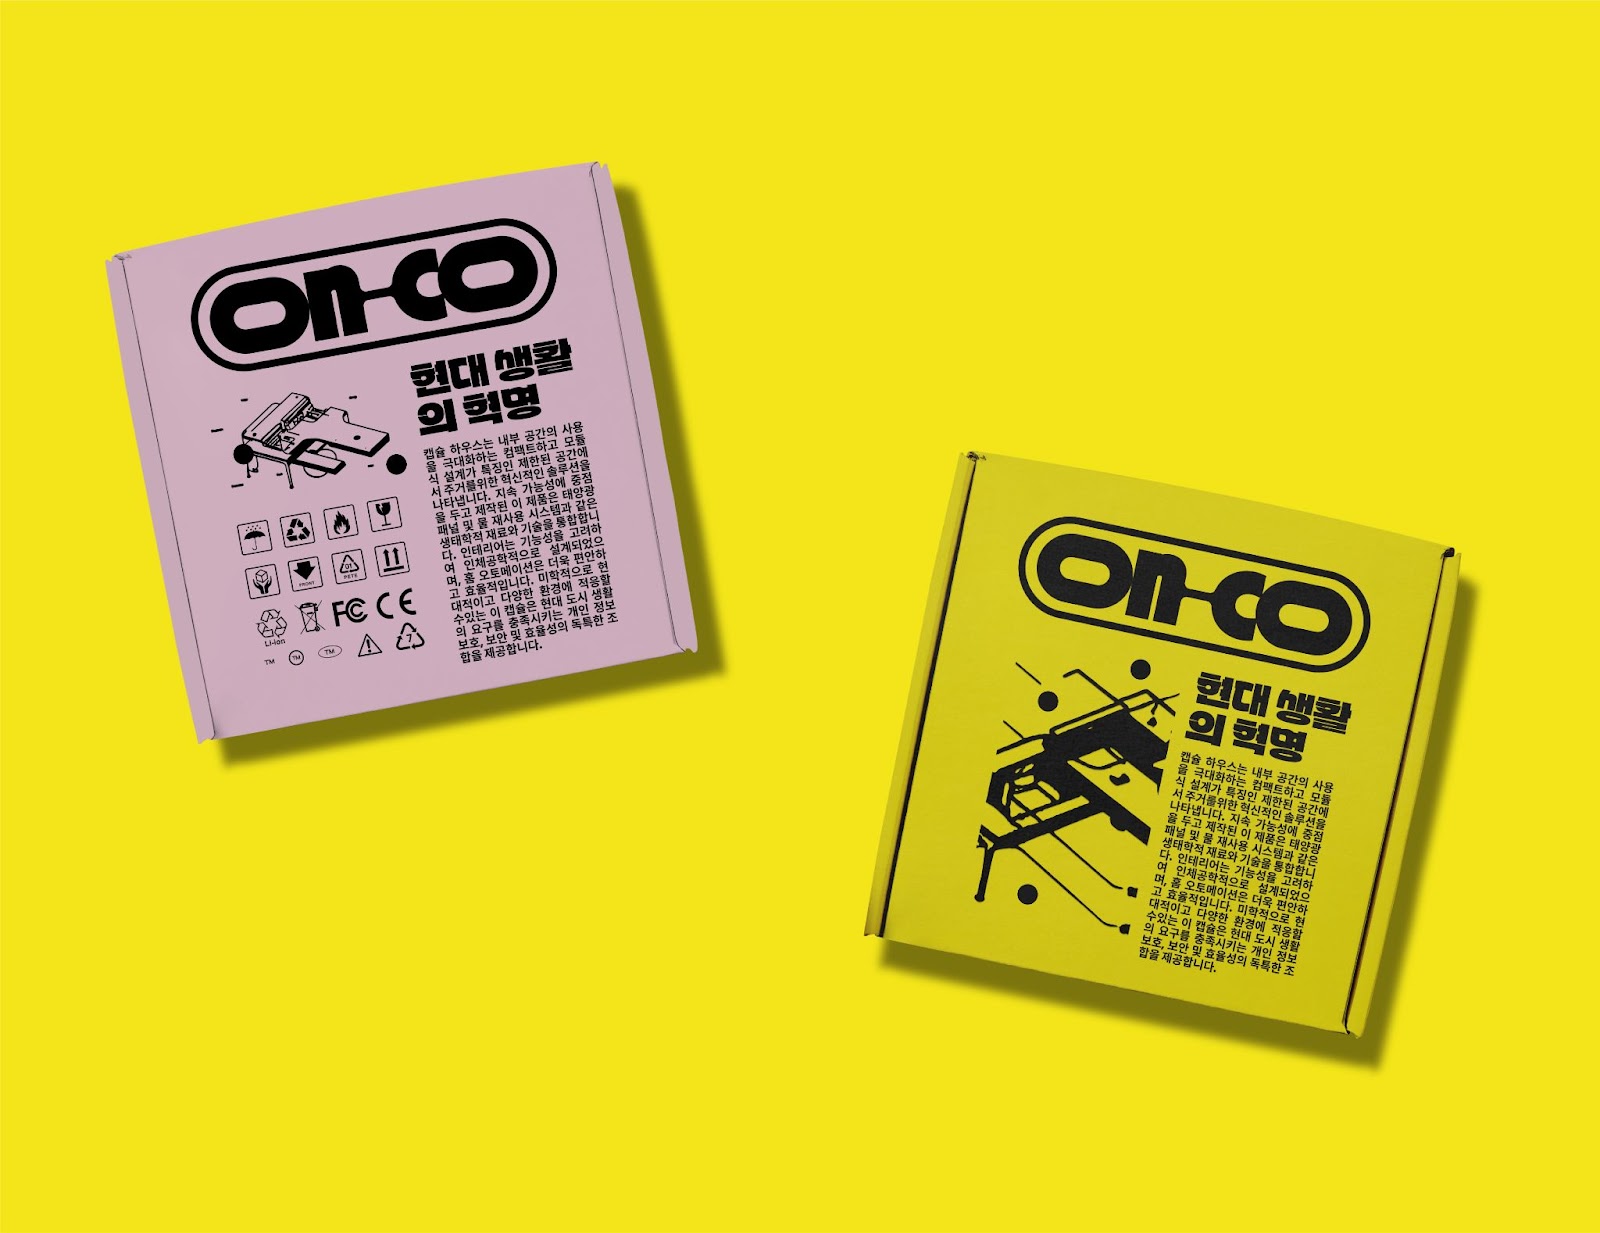 Artifact from the Onco Inc. — Building a Future in Motion with Branding and Design article on Abduzeedo